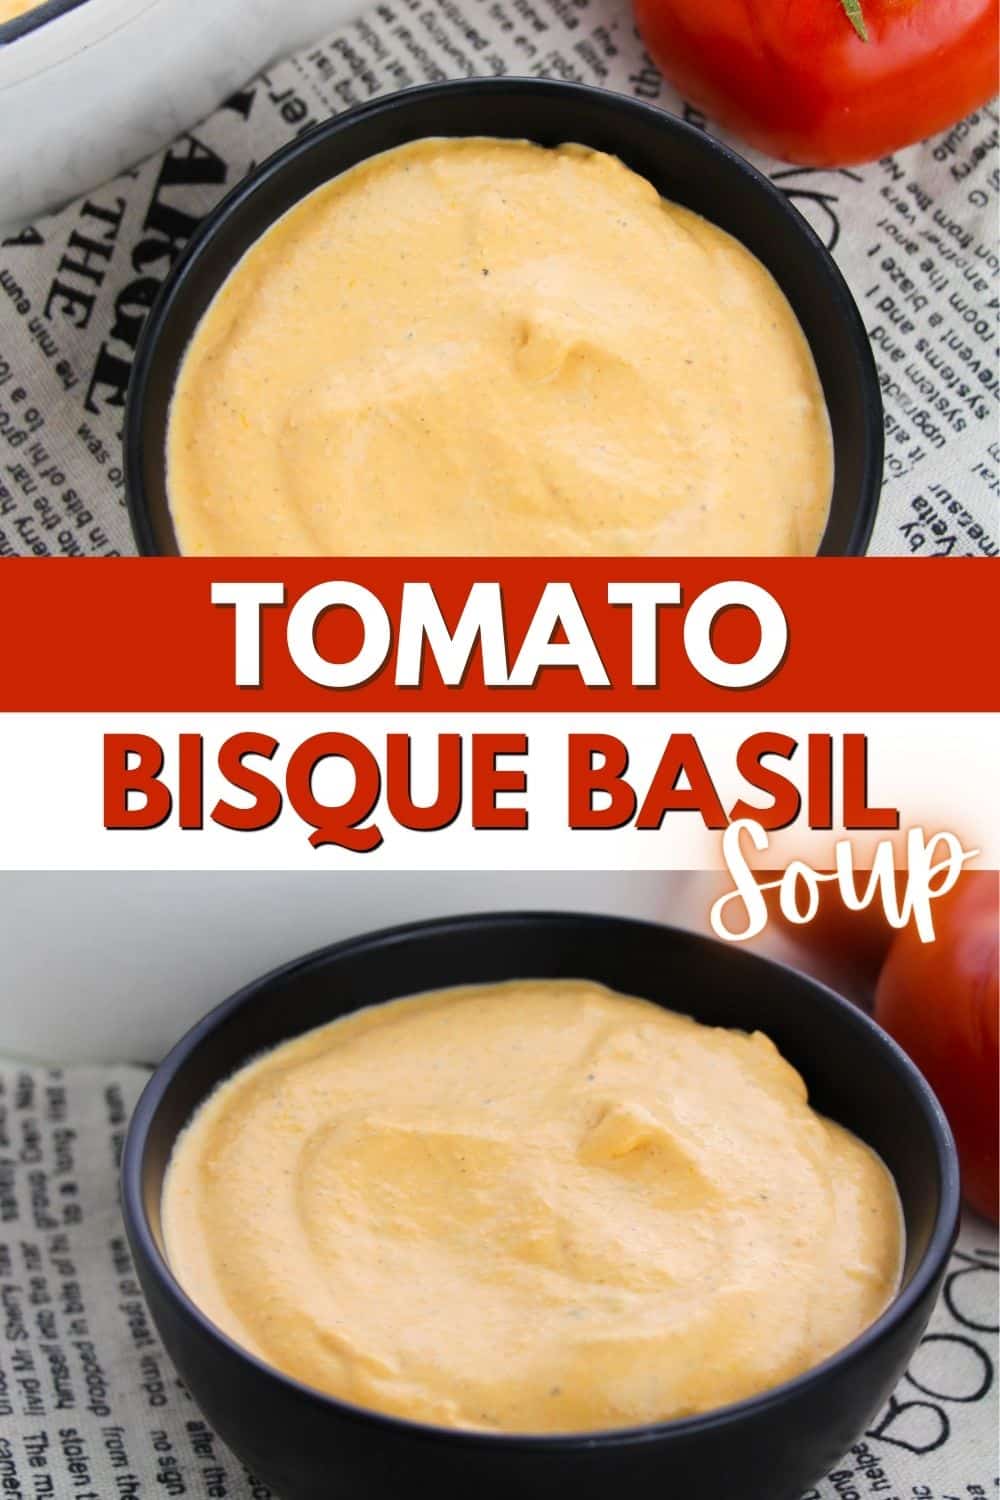 Two bowls of Tomato Bisque Basil Soup.